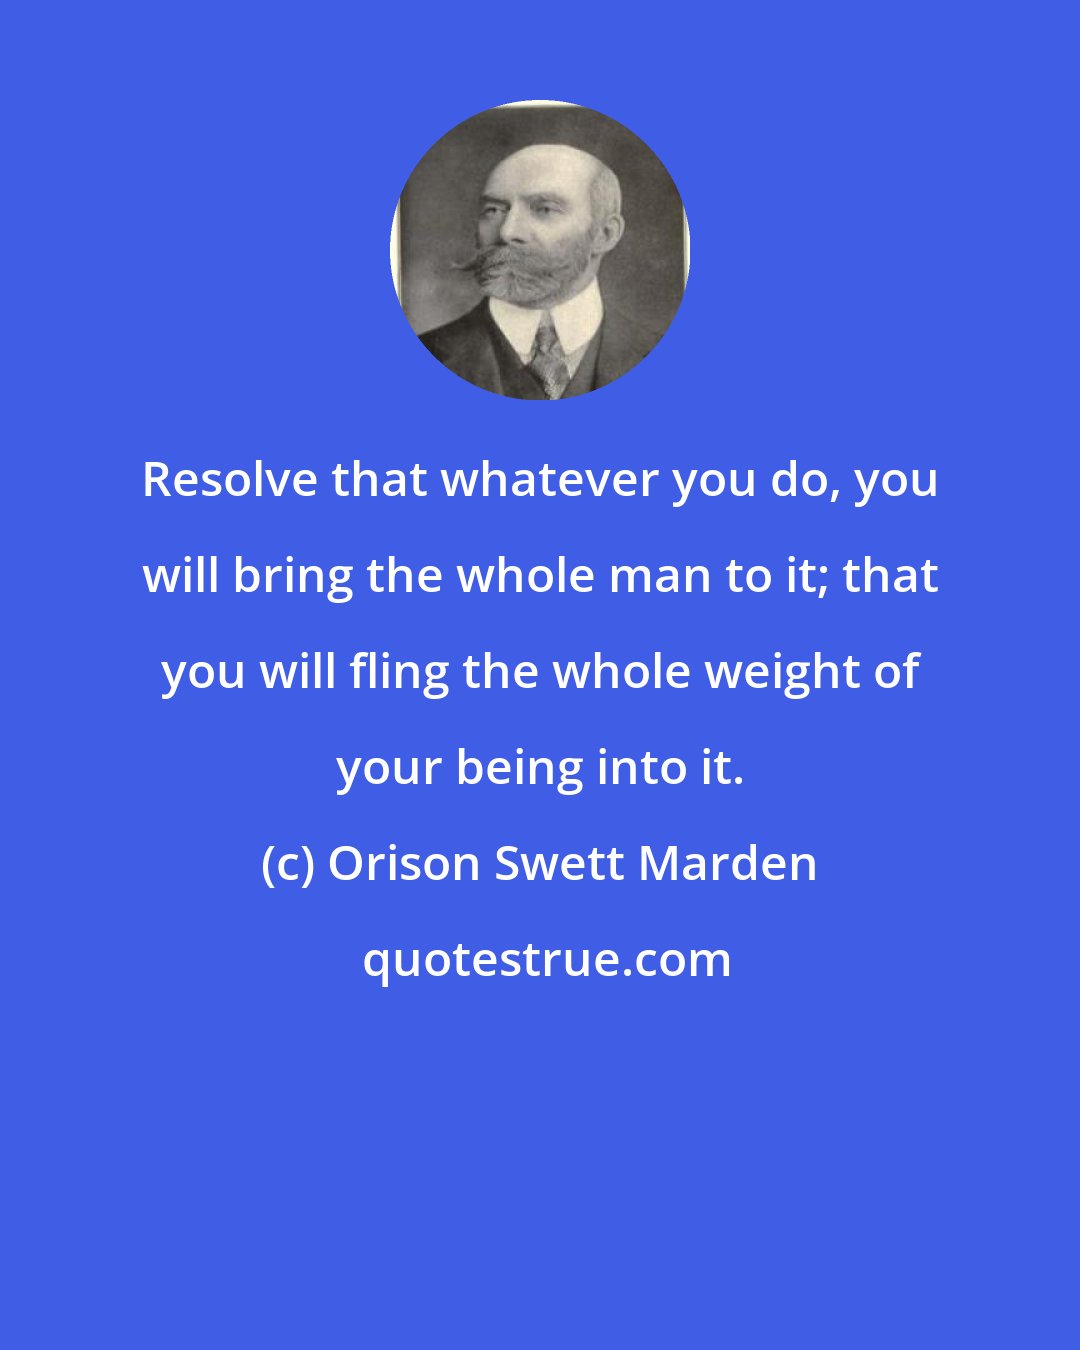 Orison Swett Marden: Resolve that whatever you do, you will bring the whole man to it; that you will fling the whole weight of your being into it.